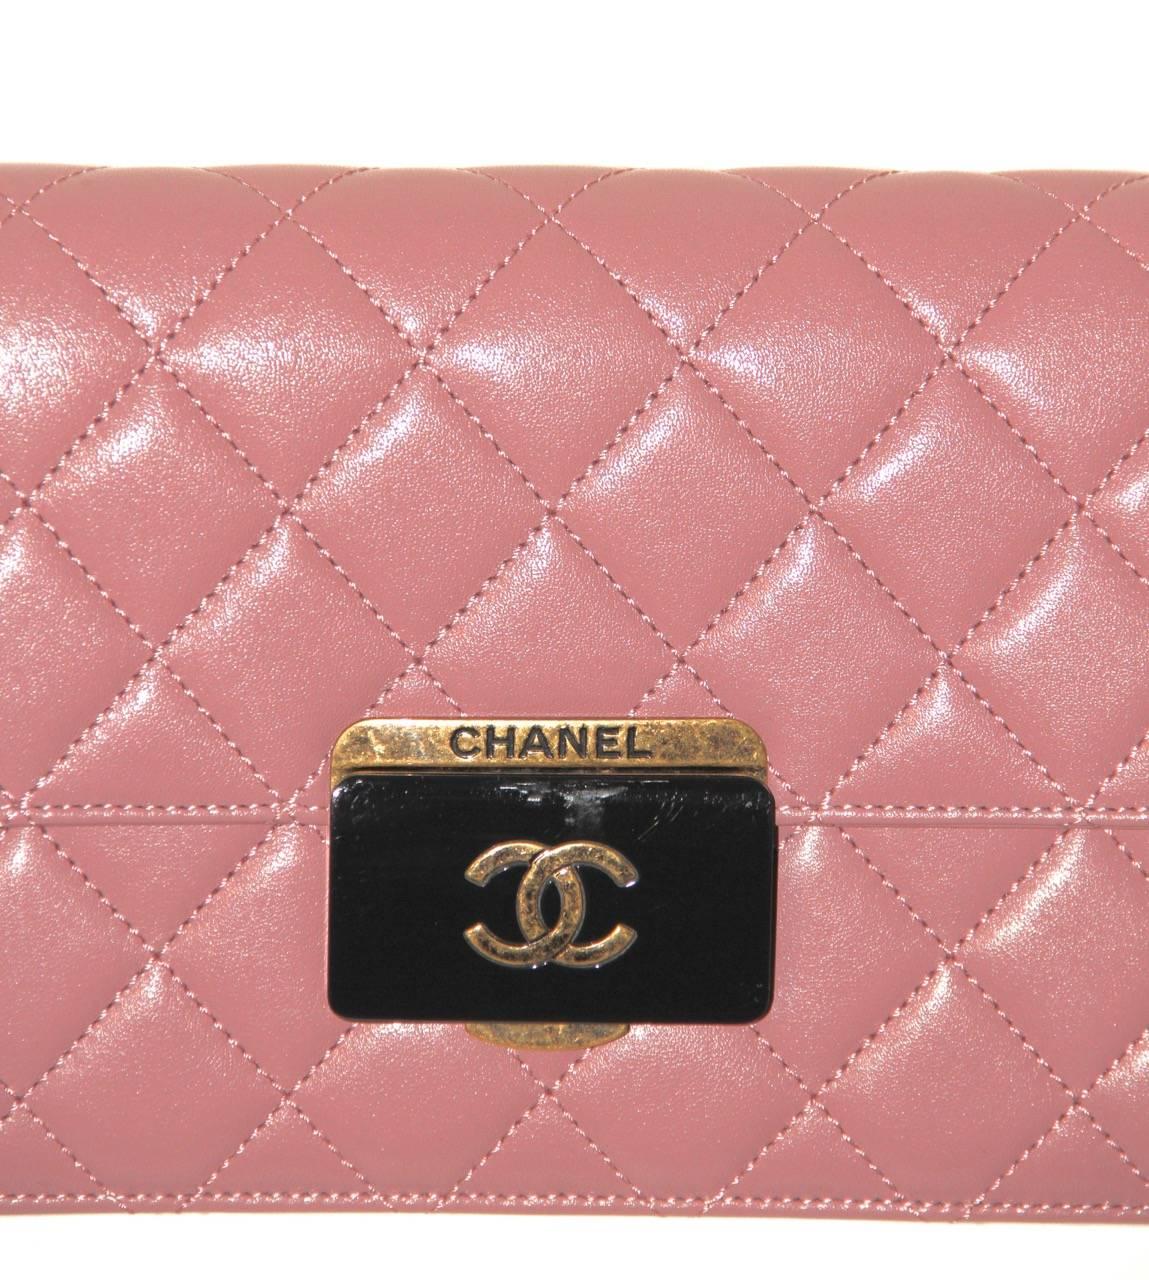 CHANEL Beauty Lock Collection Old Pink Sheepskin Leather Flap Bag  2